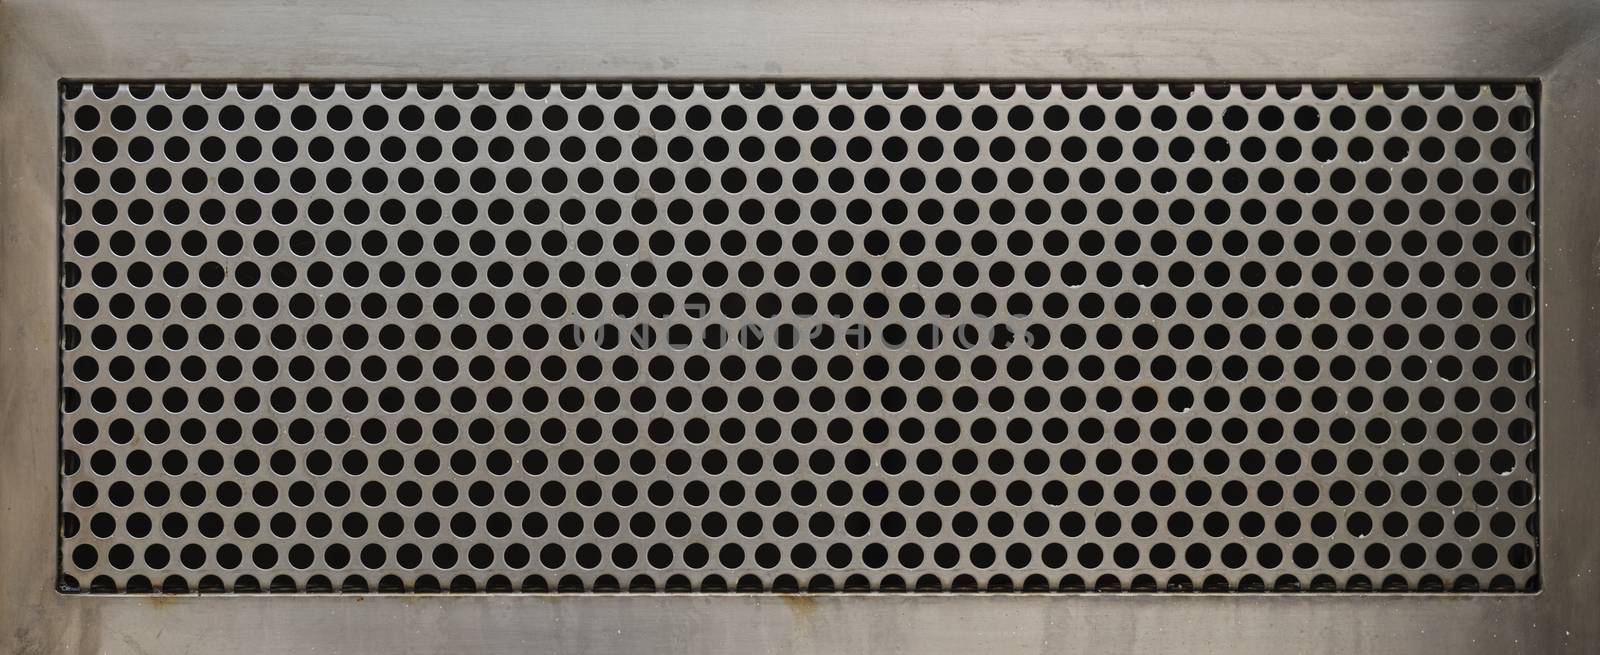 Perforated metal plate. Texture for your design